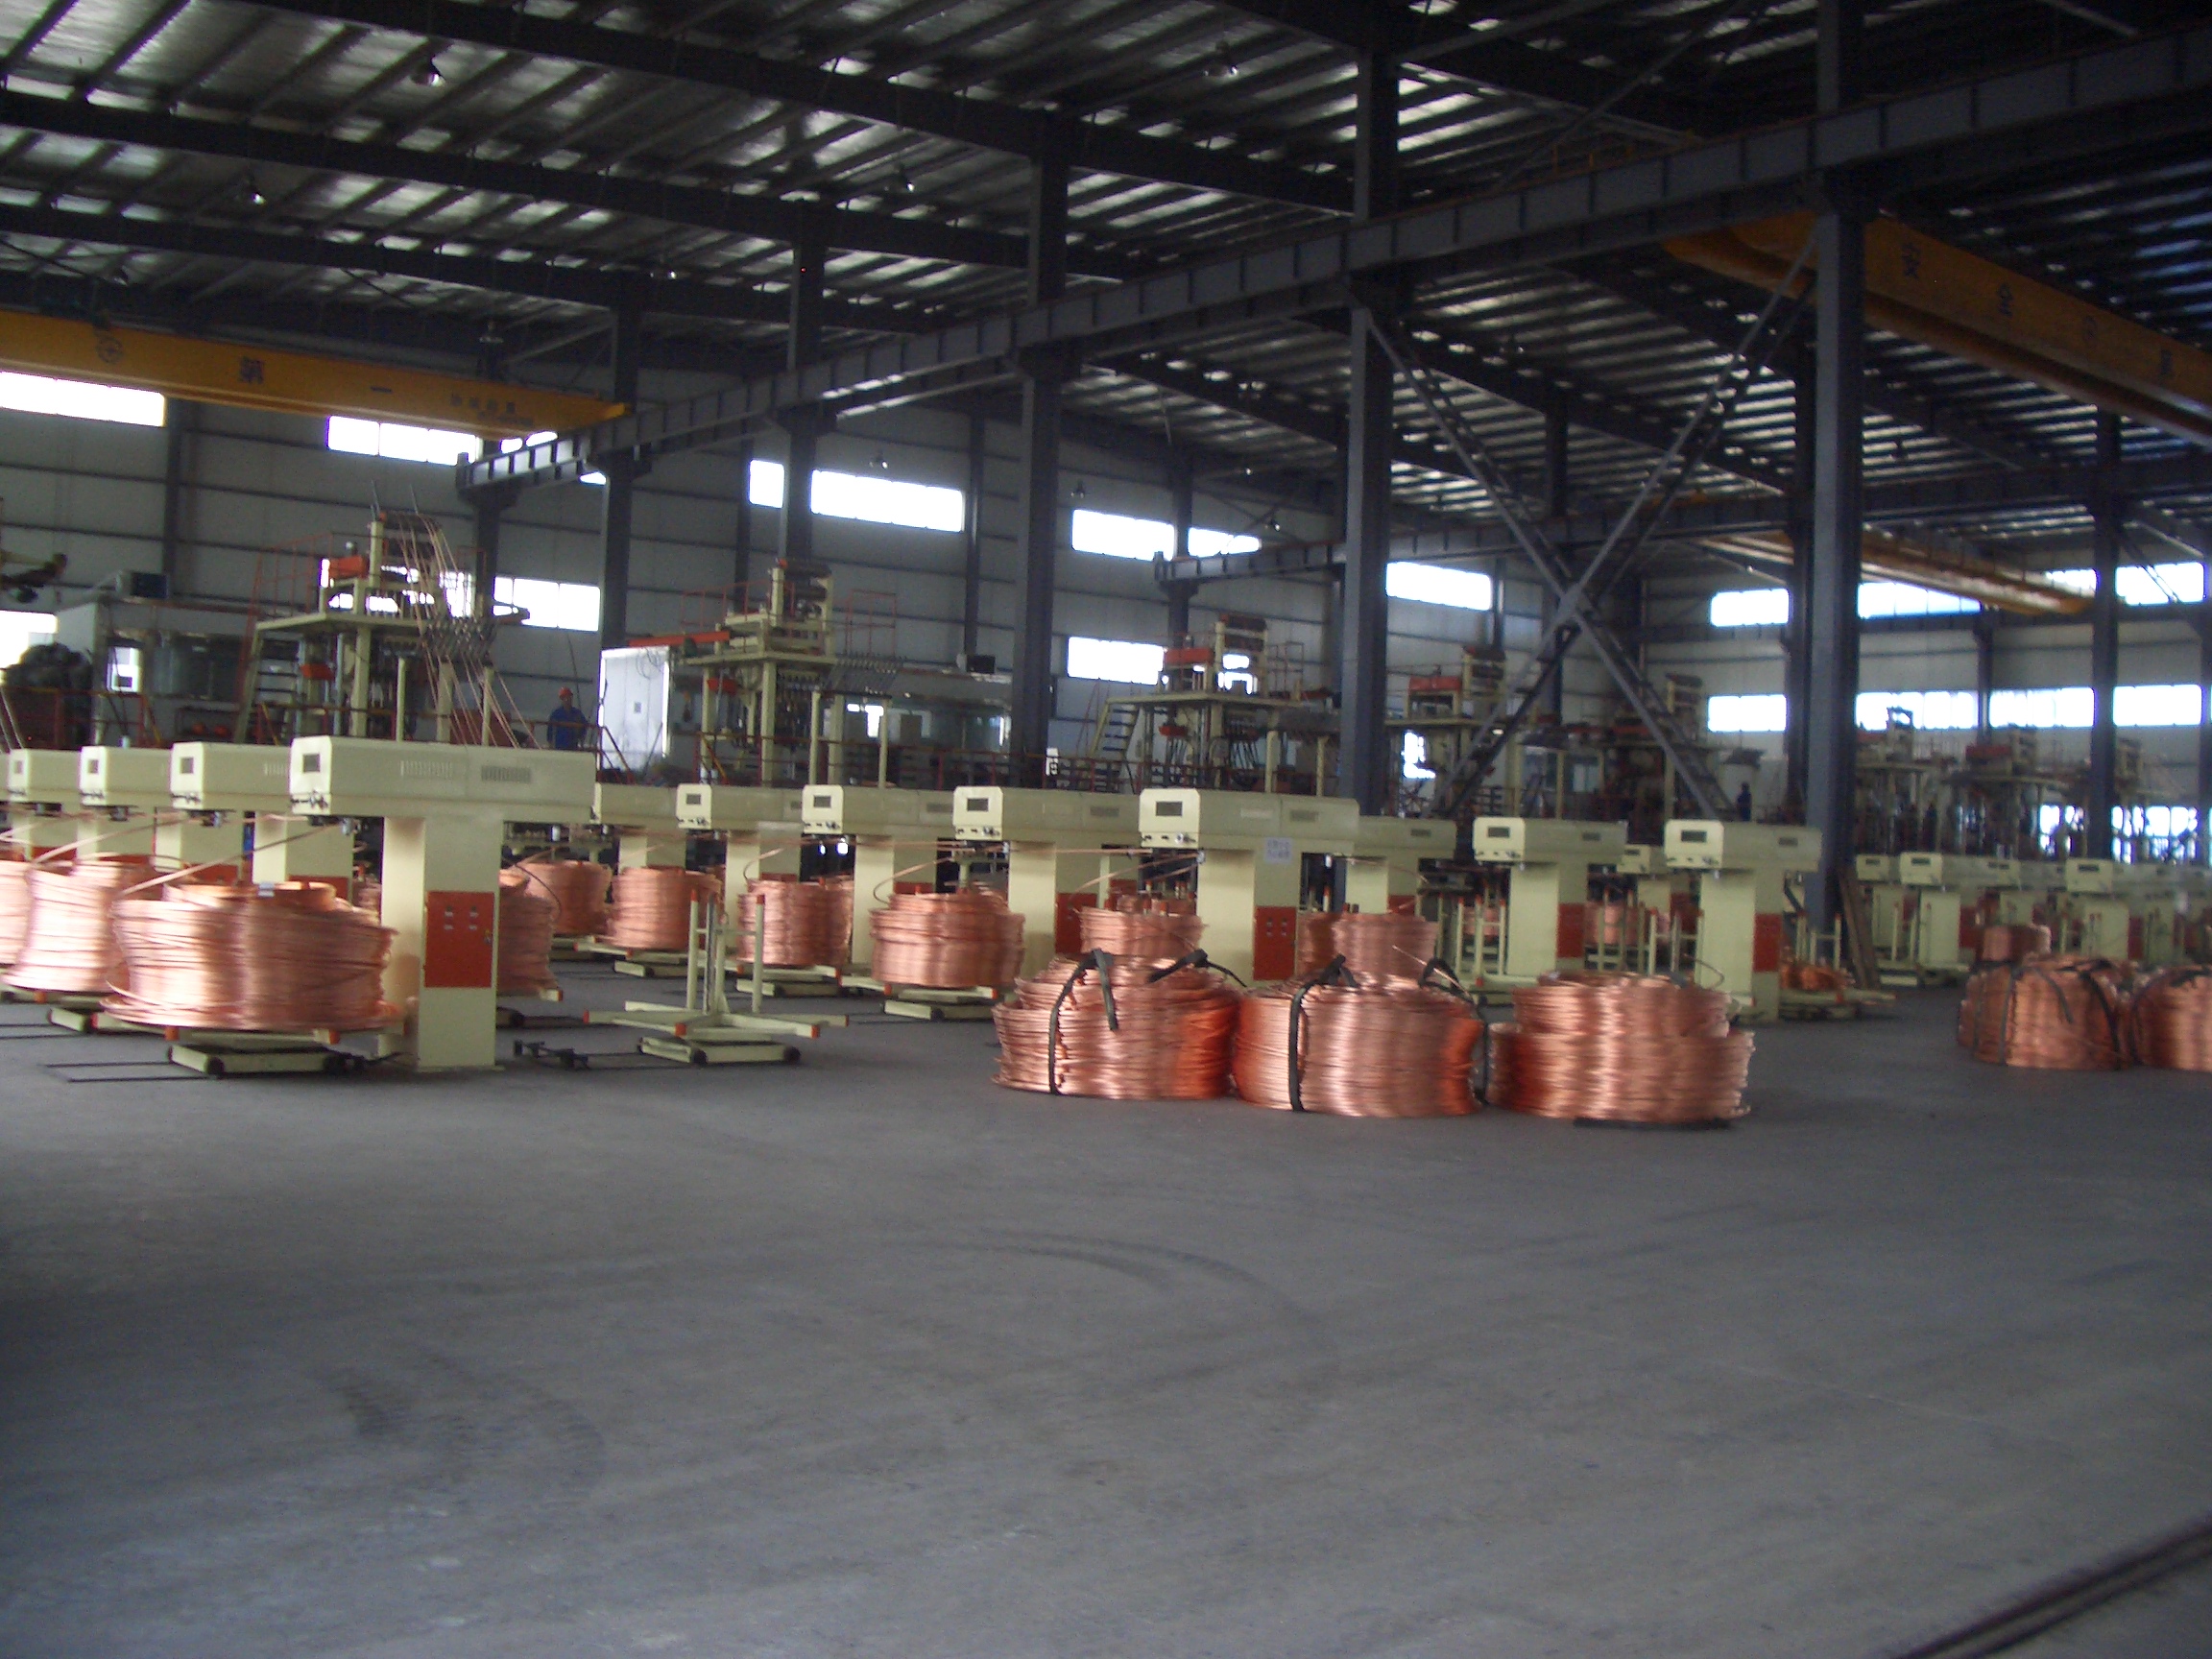 the coiling machine in upwards continuous casting machine for oxygen-free copper rod